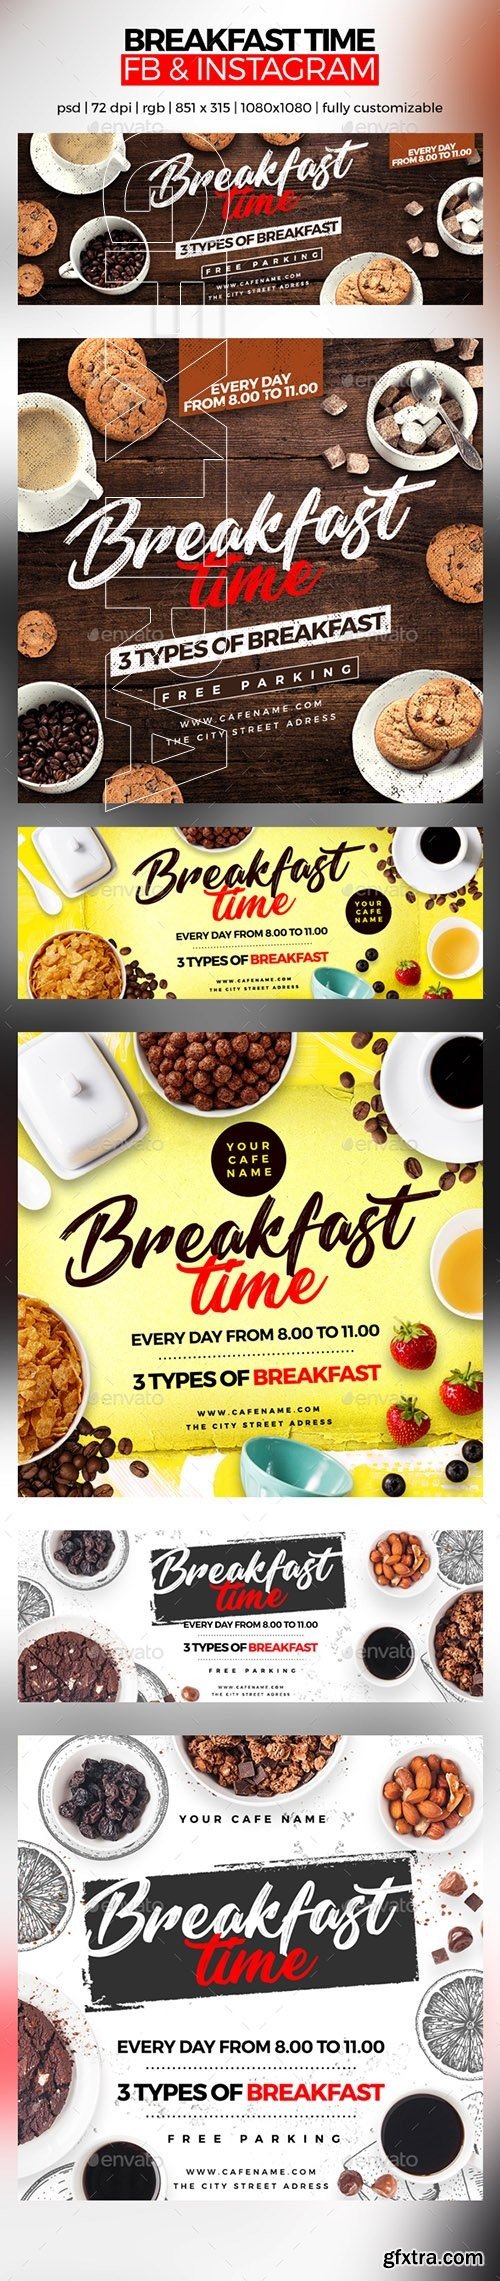 GraphicRiver - Breakfast Time Facebook Cover and Instagram 22672687